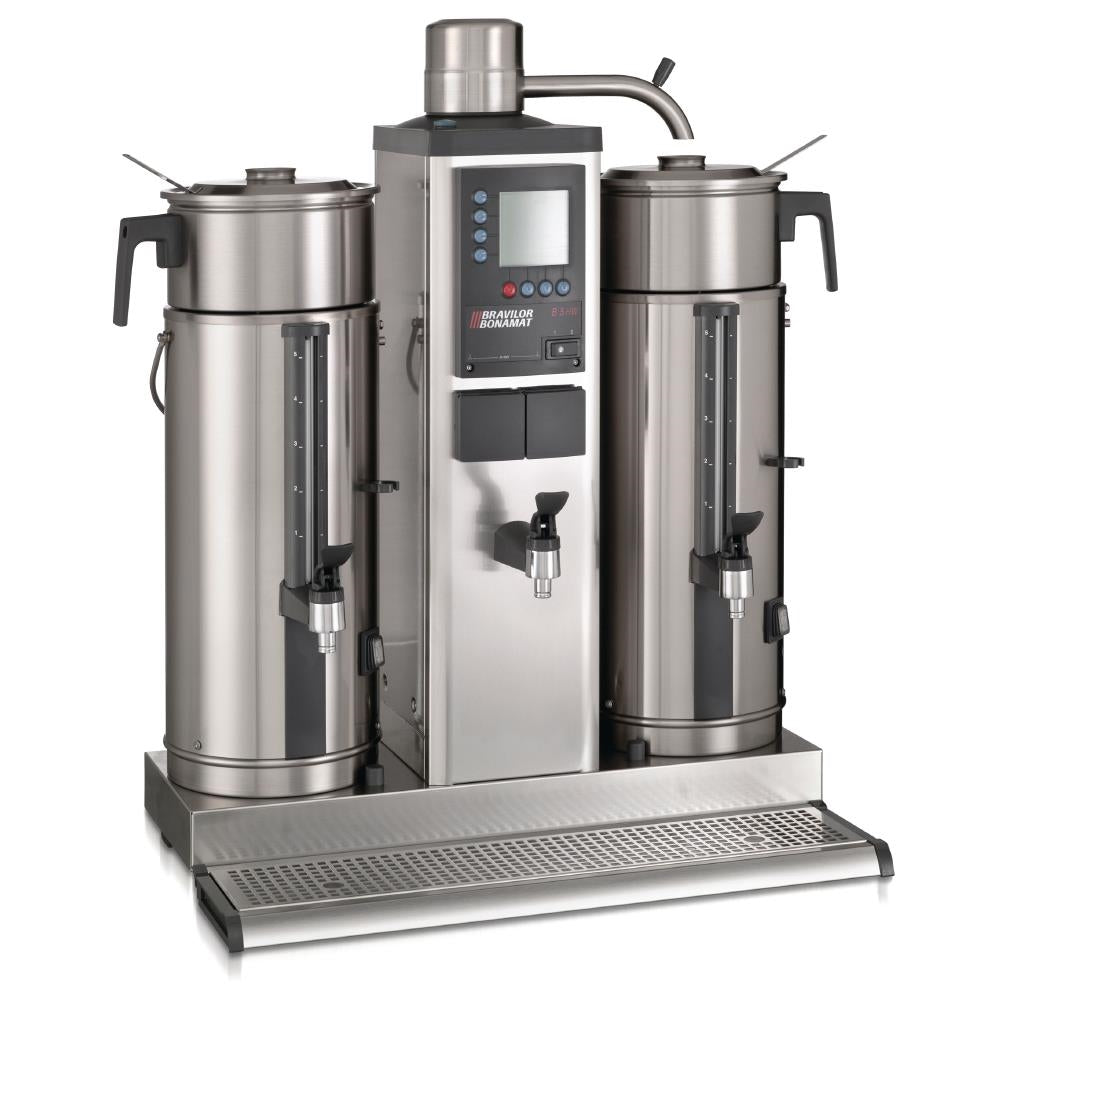 DC687-3P Bravilor B5 HW Bulk Coffee Brewer with 2x5Ltr Coffee Urns and Hot Water Tap Three Phase JD Catering Equipment Solutions Ltd